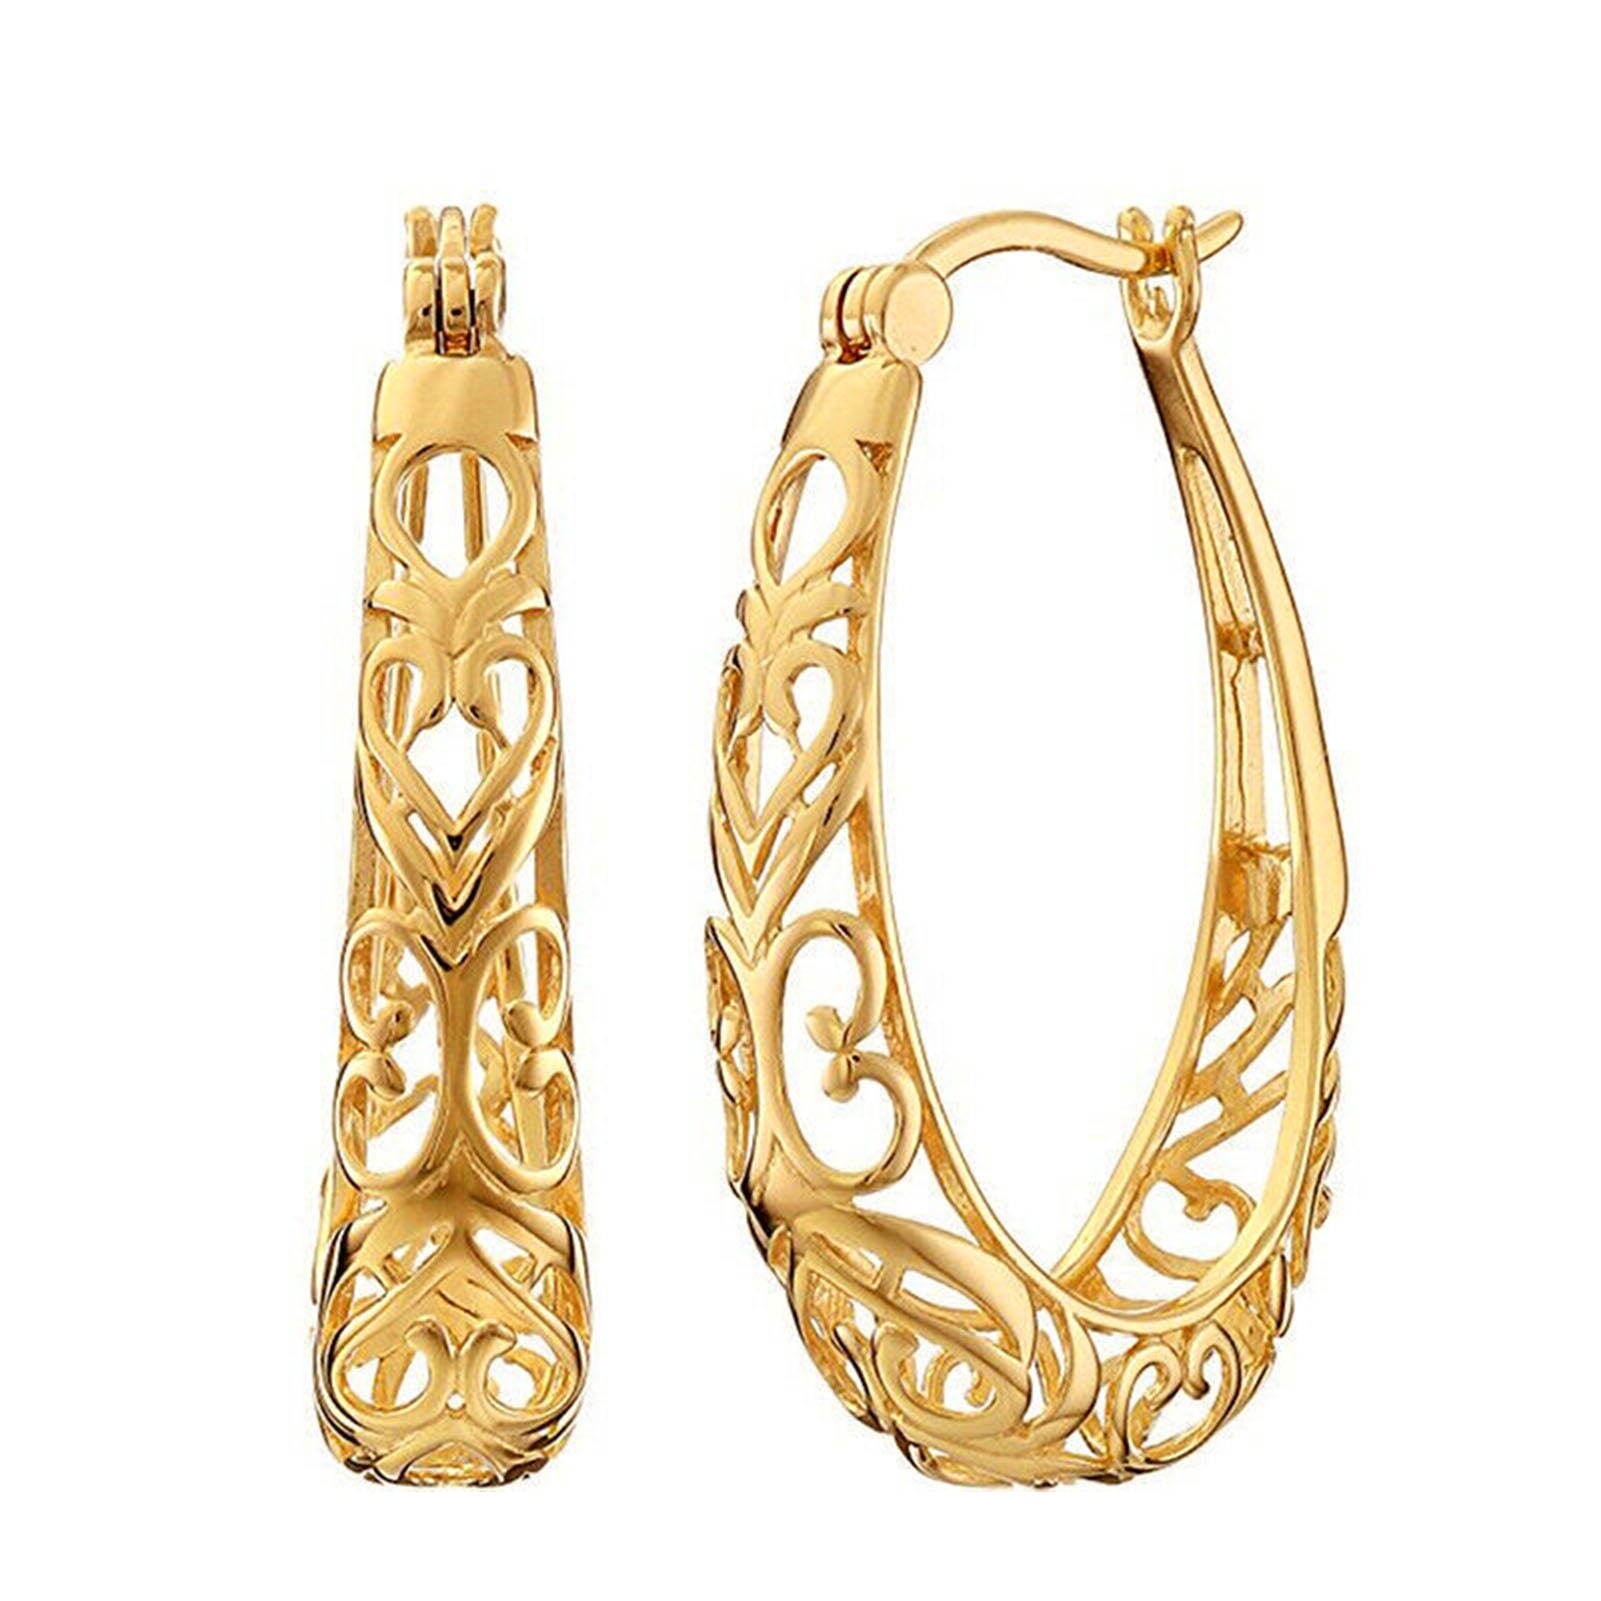 Womens Sparkling Creole Classic 5cm Big Hoop Earrings 14K Yellow Gold Plated UK 